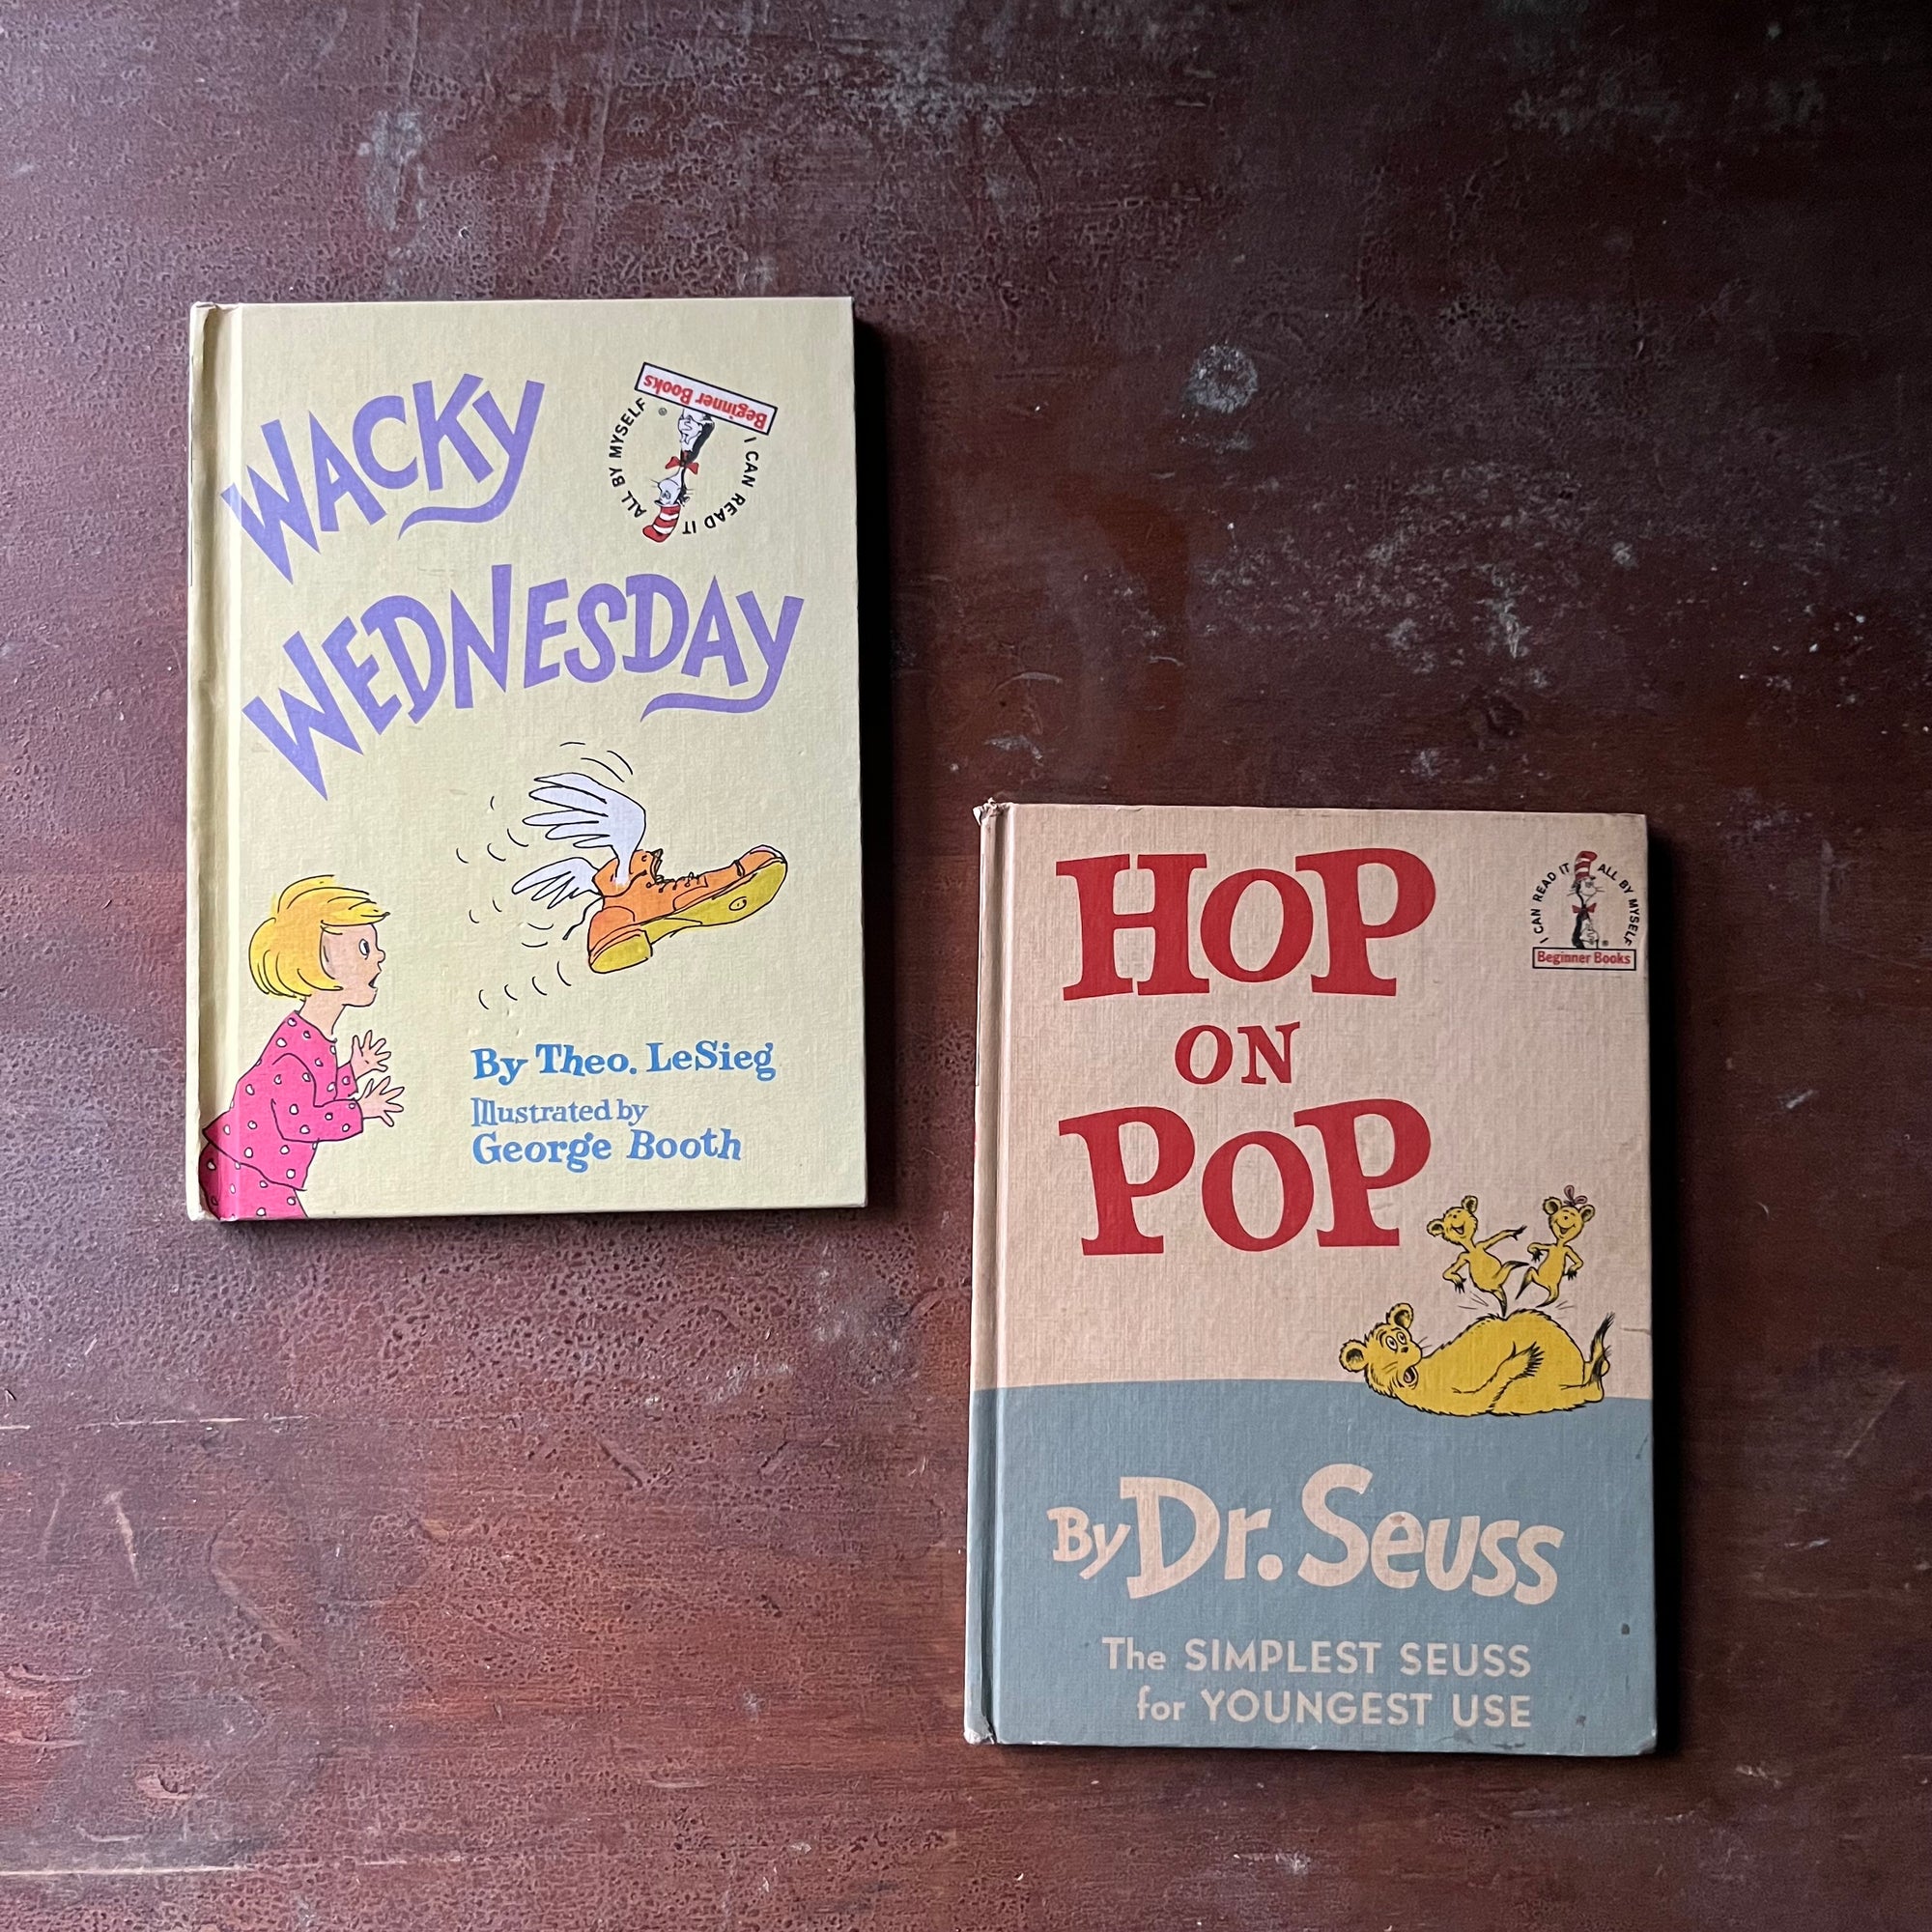 vintage children's picture books, vintage I Can Read It All By Myself Books, Pair of Dr. Seuss Books - Wacky Wednesday written by Theo. LeSieg with illustrations by George Booth and Hop on Pop written by Dr. Seuss - view of the front covers